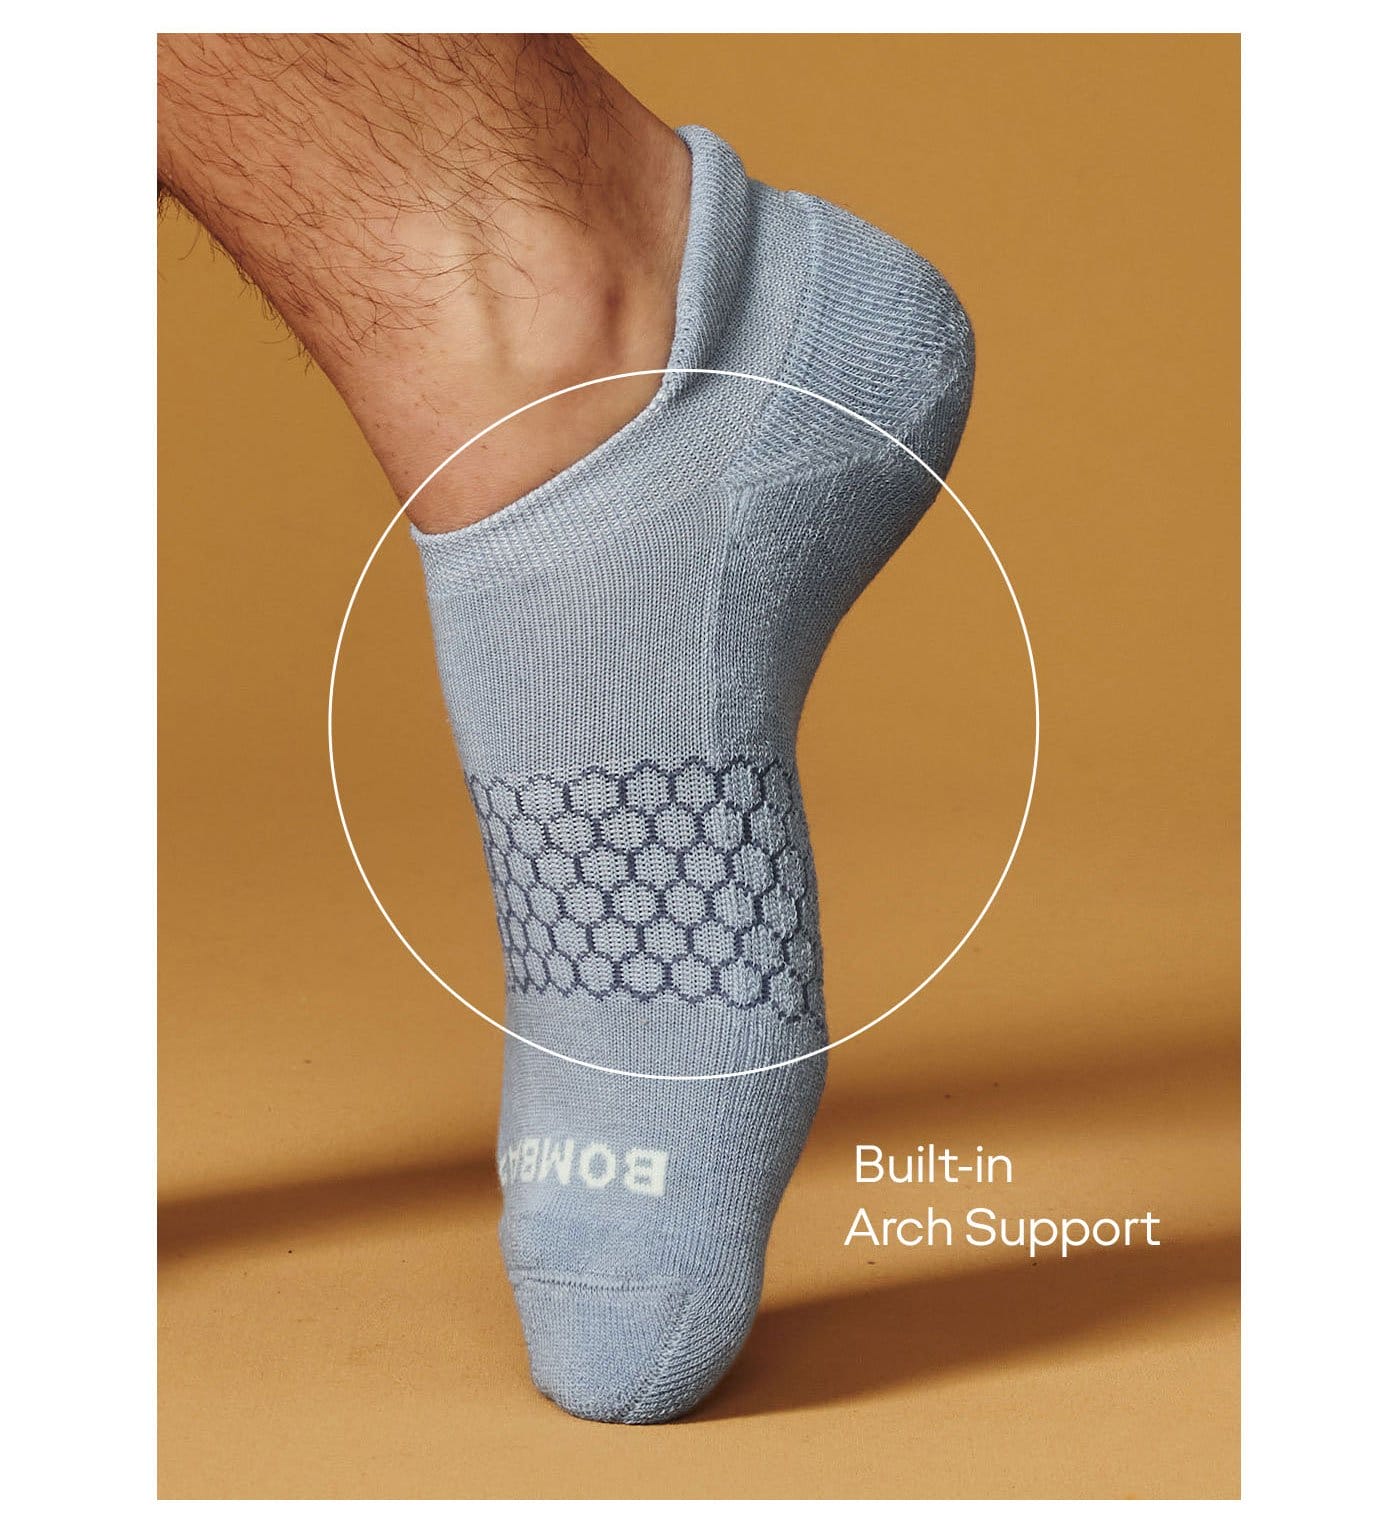 Built-in Arch Support